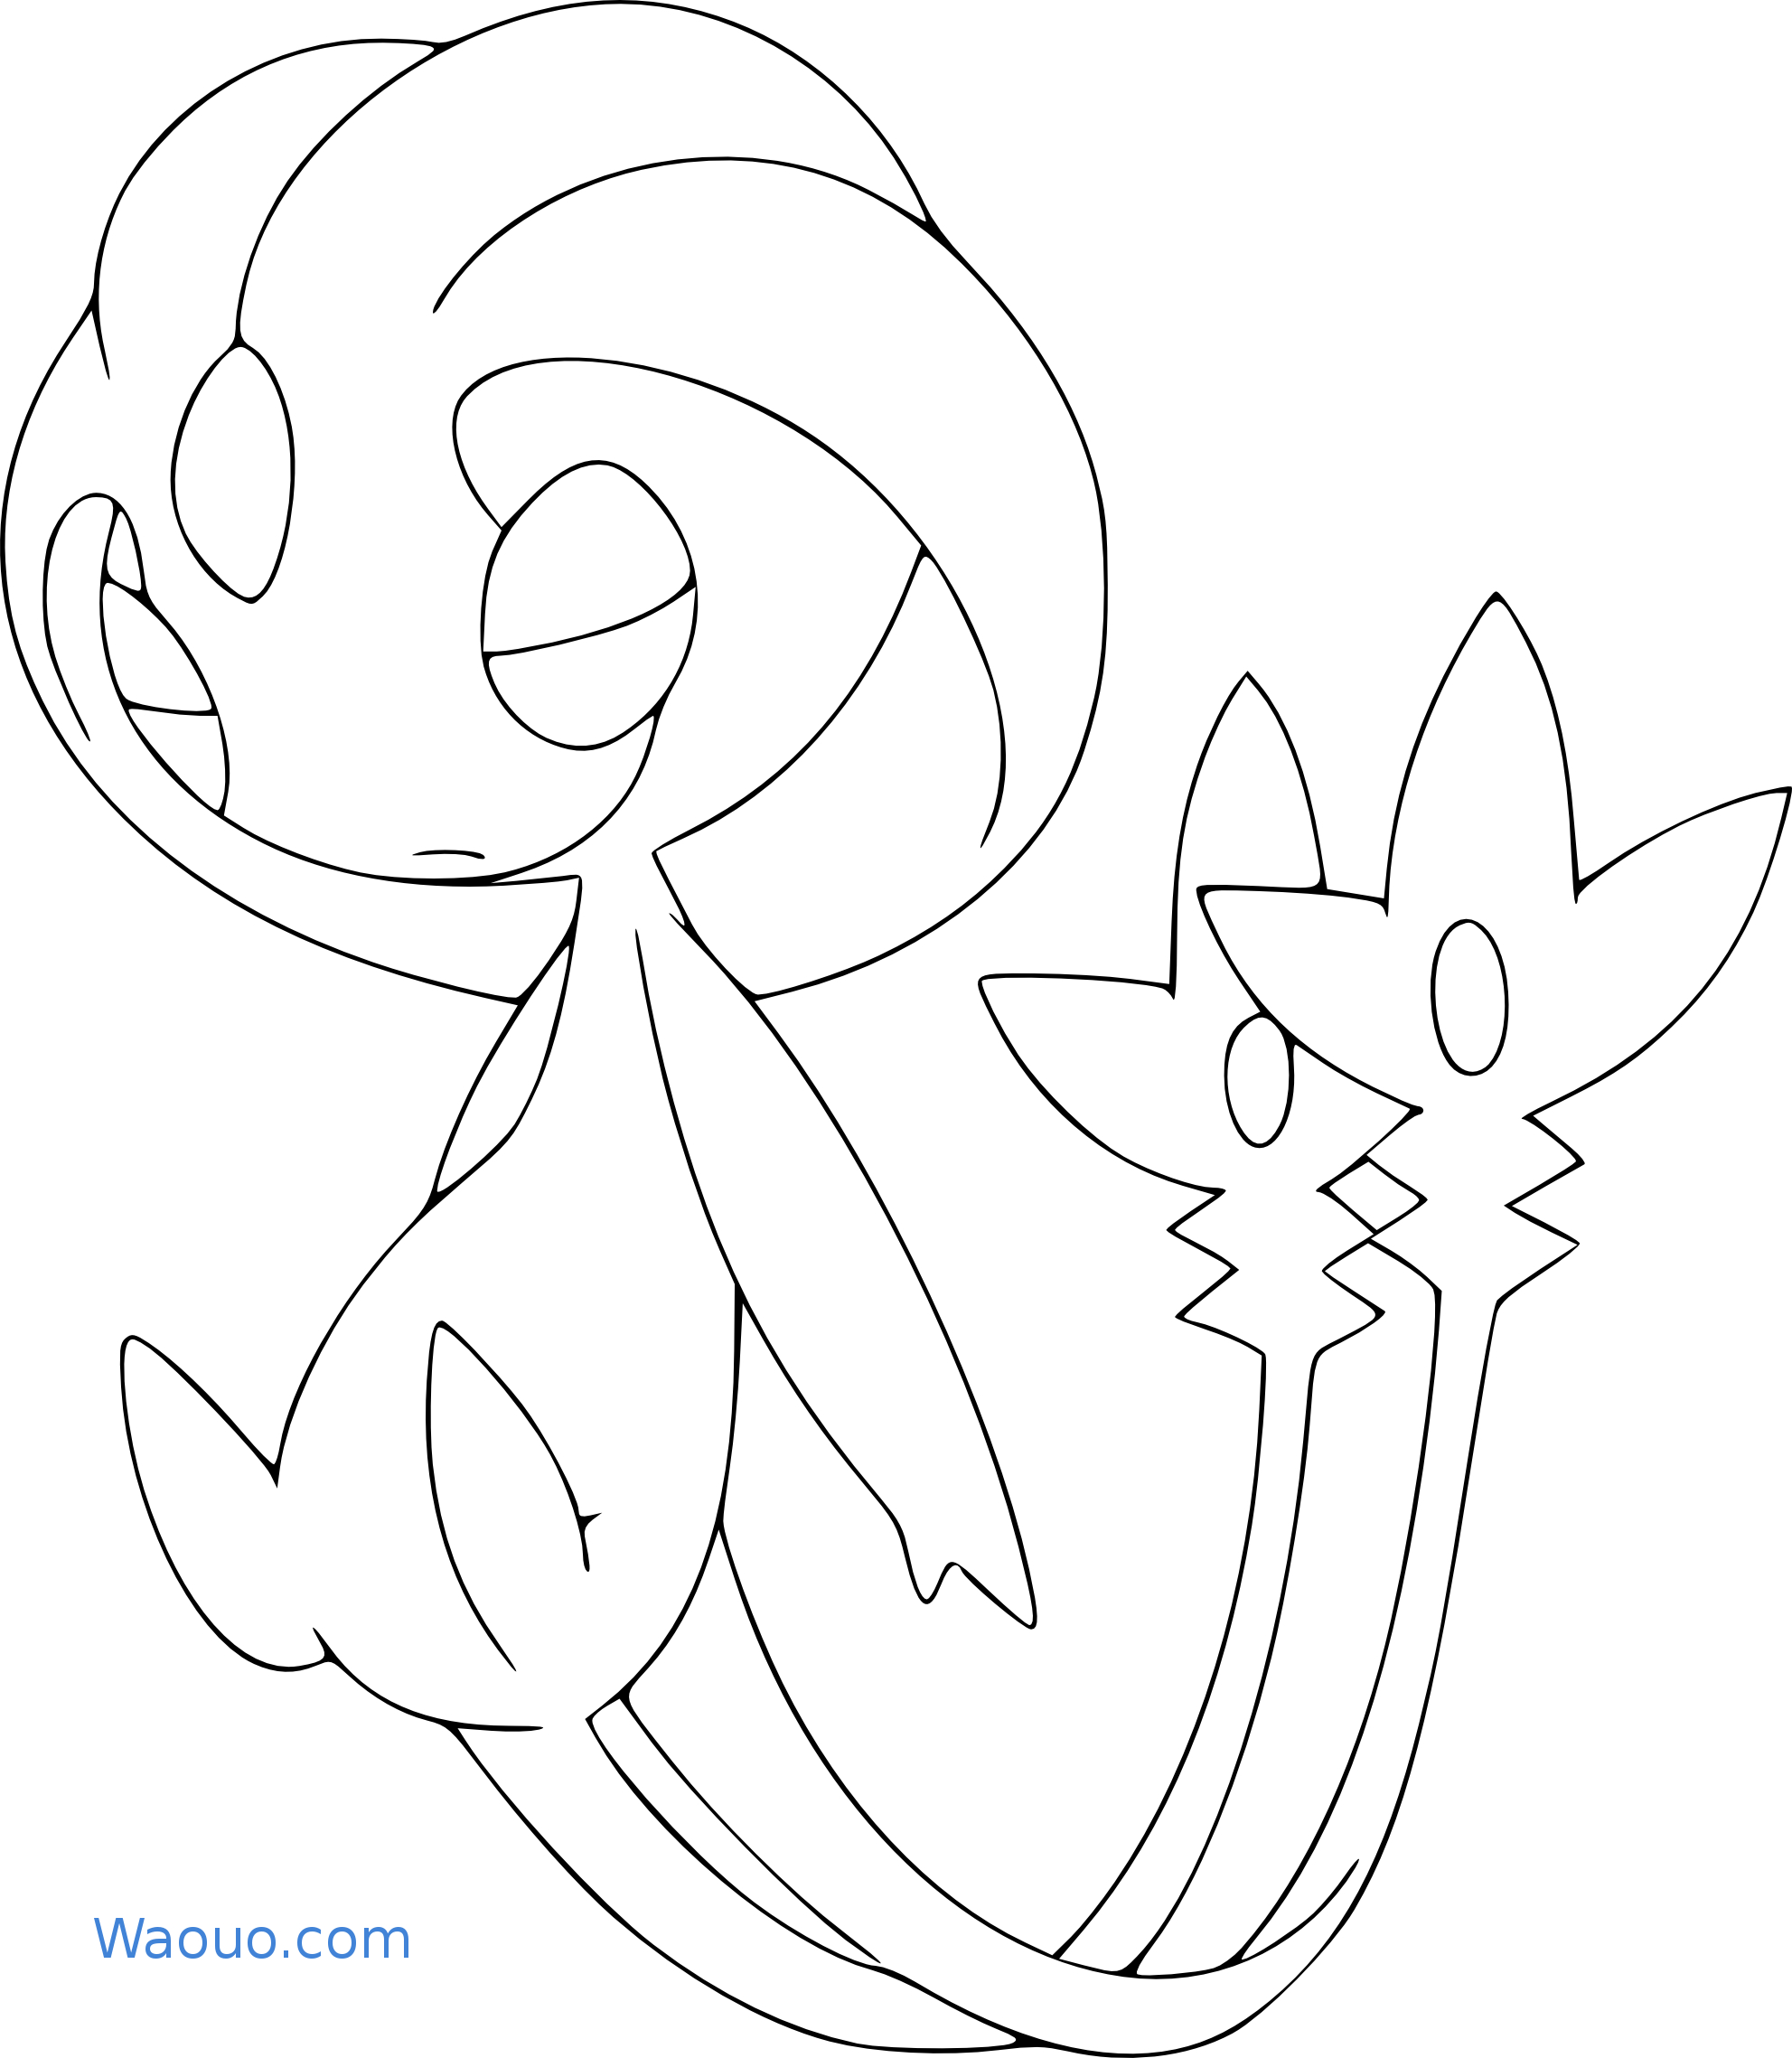 Legendary Pokemon Uxie coloring page